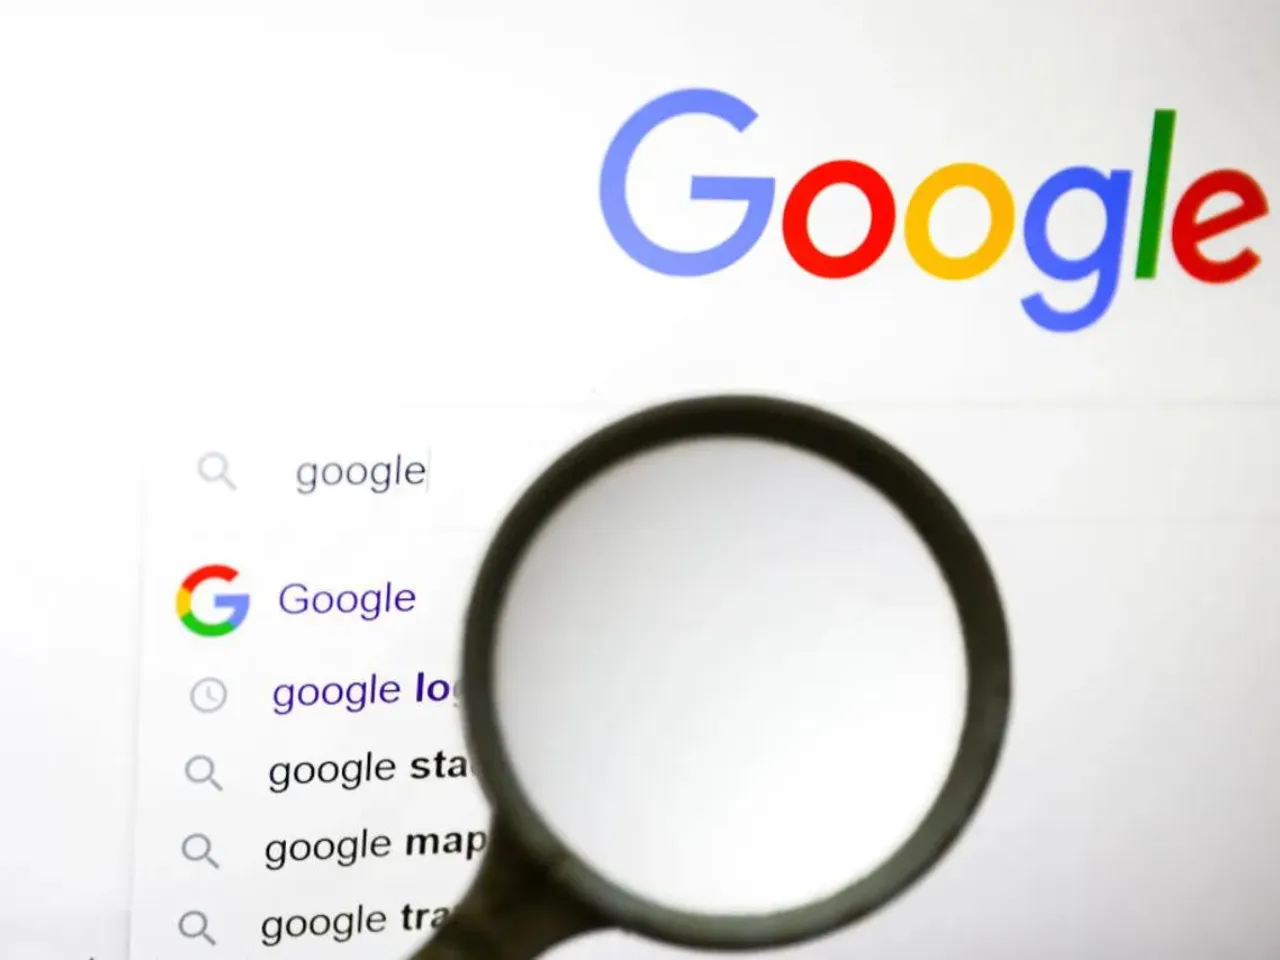 Google to combat misinformation with new image search features